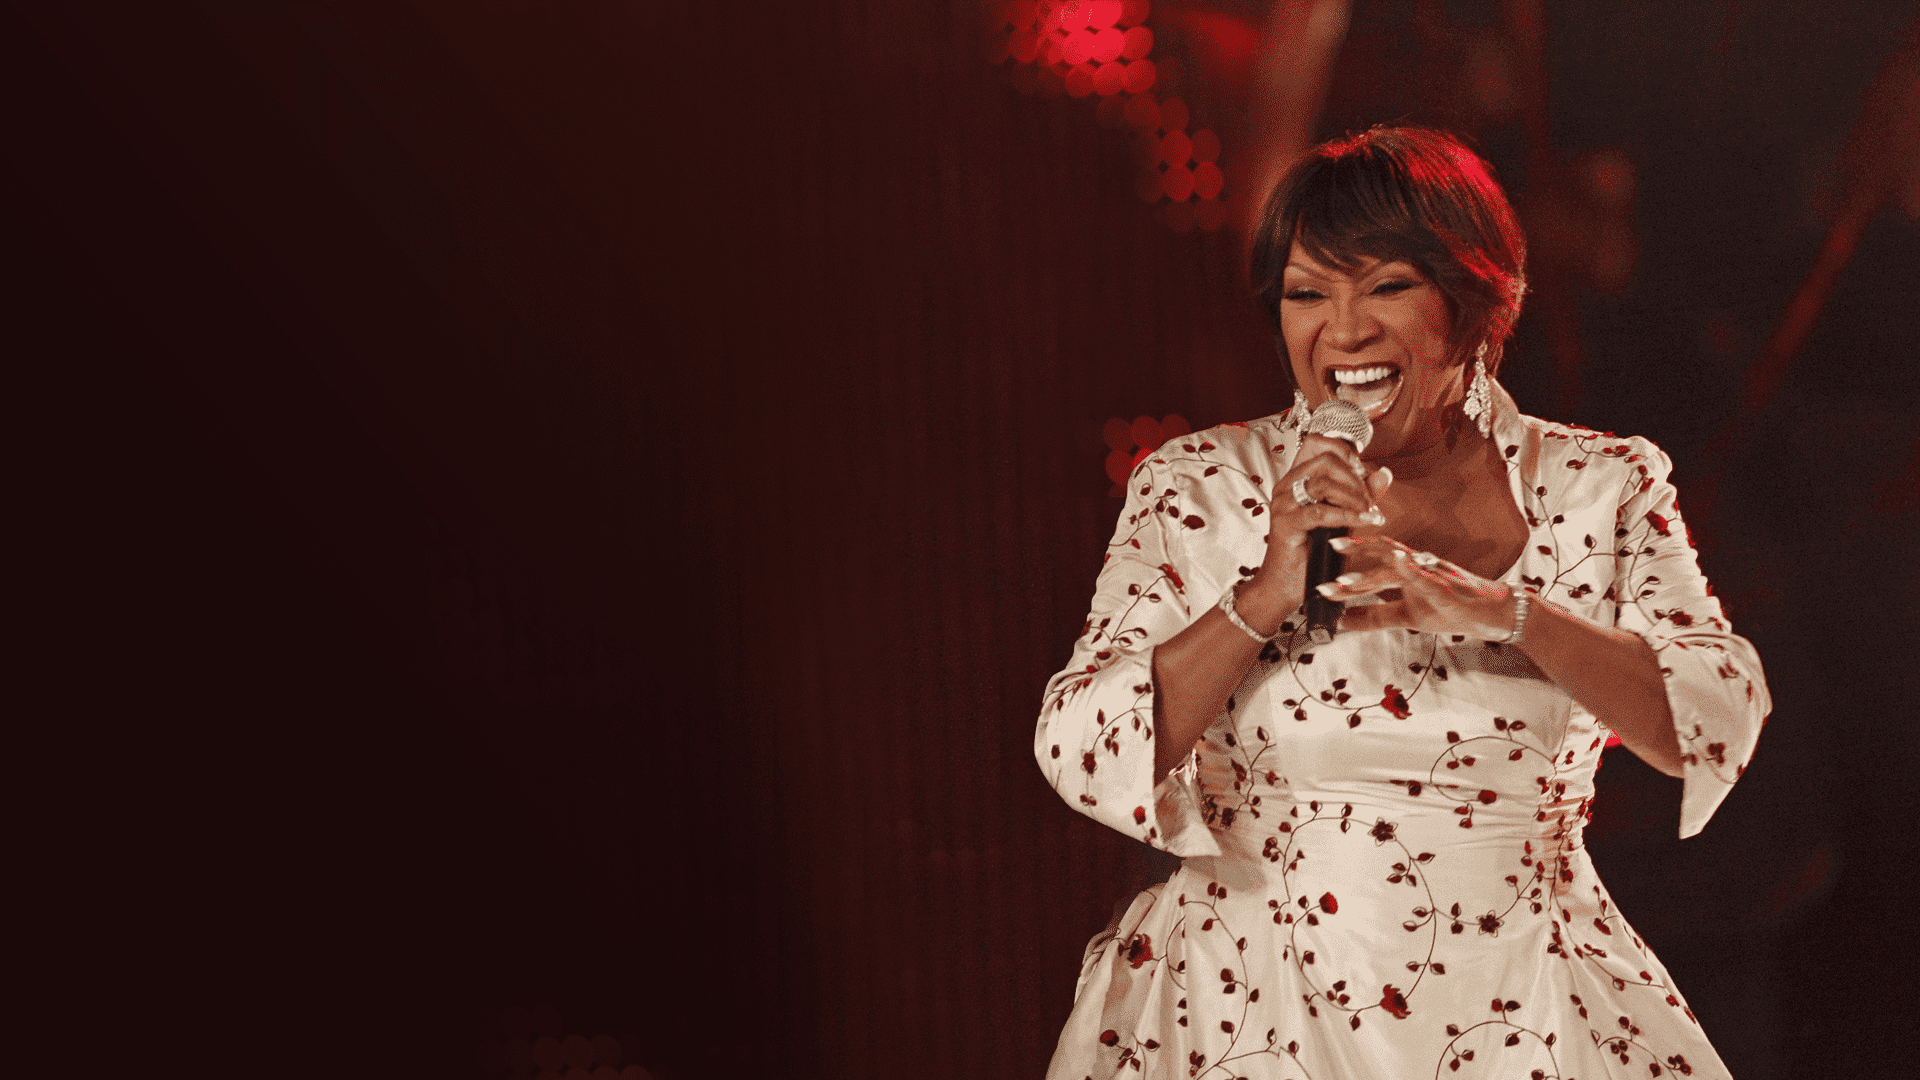 Patti Labelle Performs Lady Marmalade at the World Music Awards